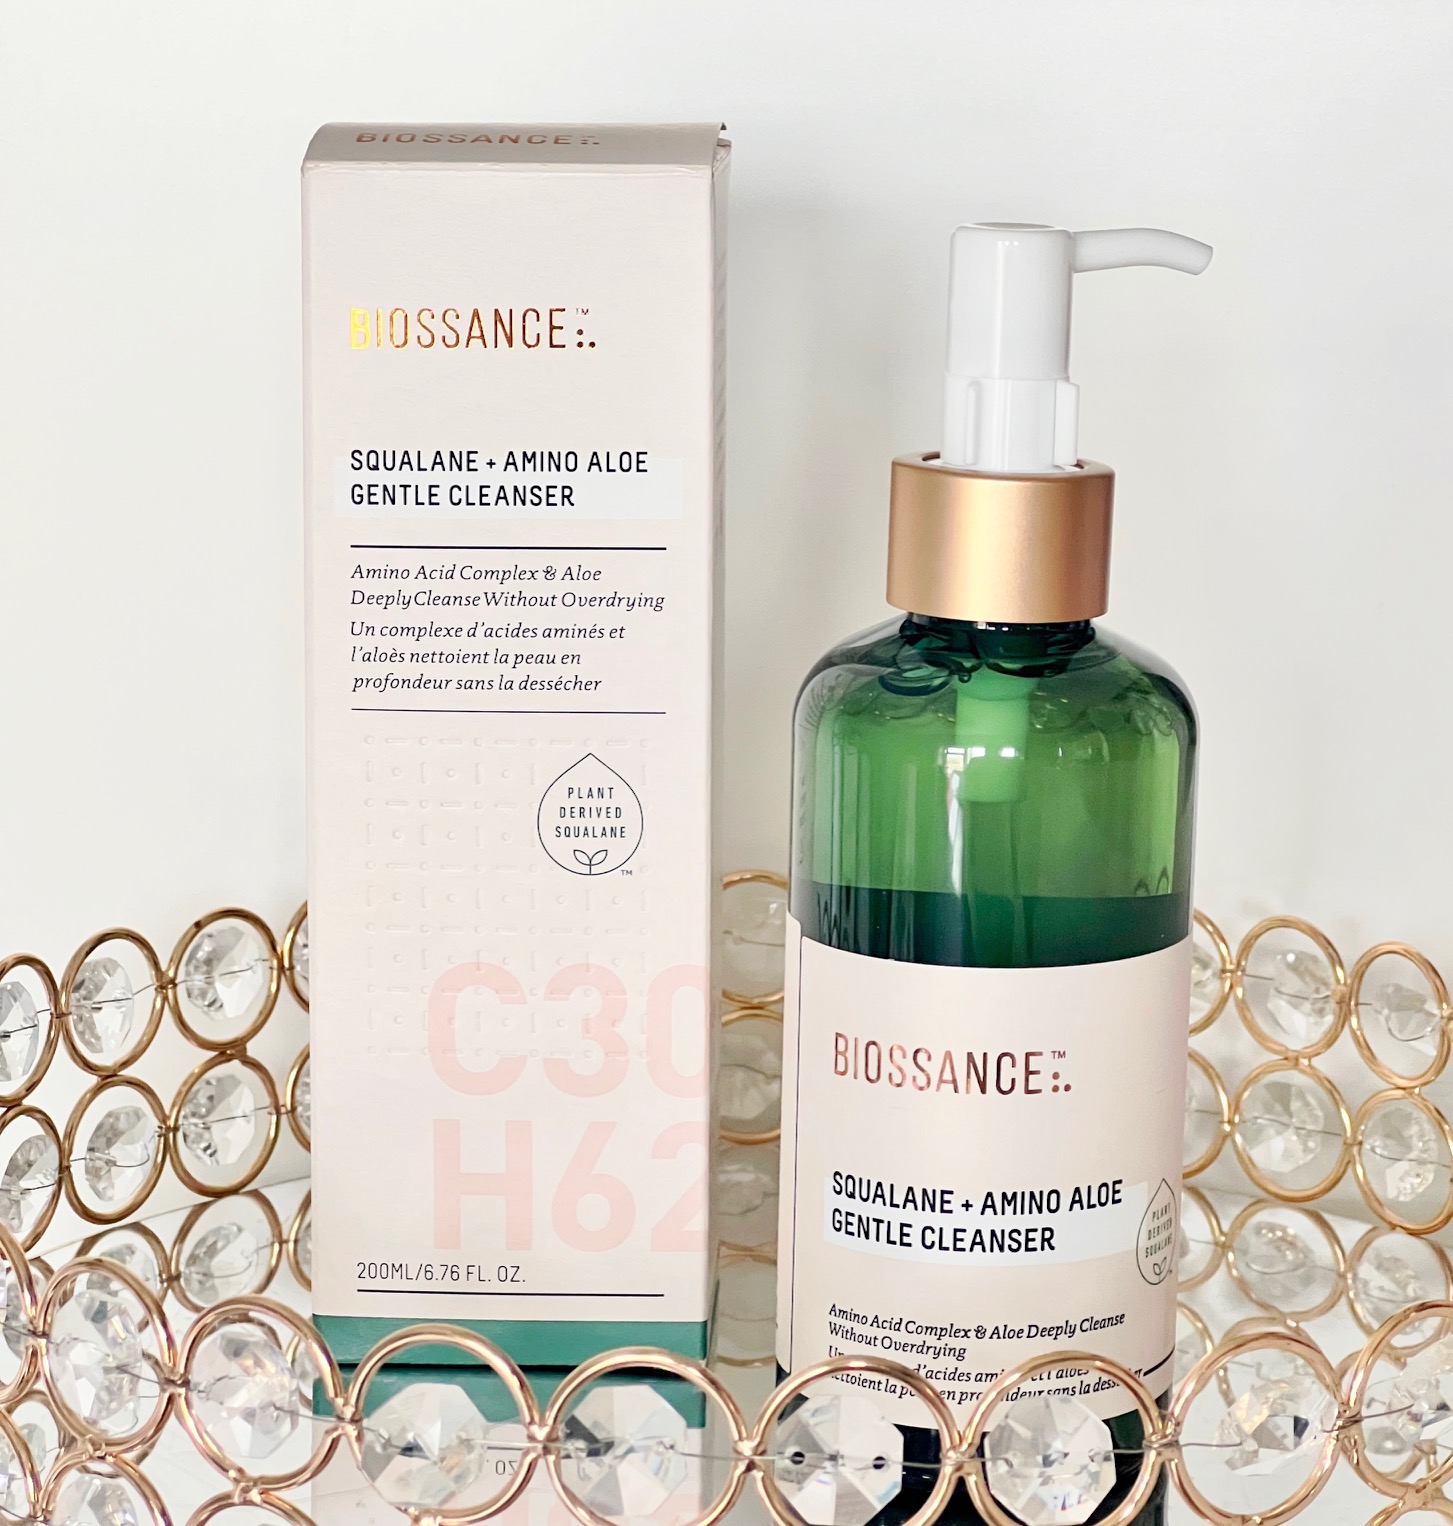 Biossance Squalane and Amino Aloe Gentle Cleanser Review